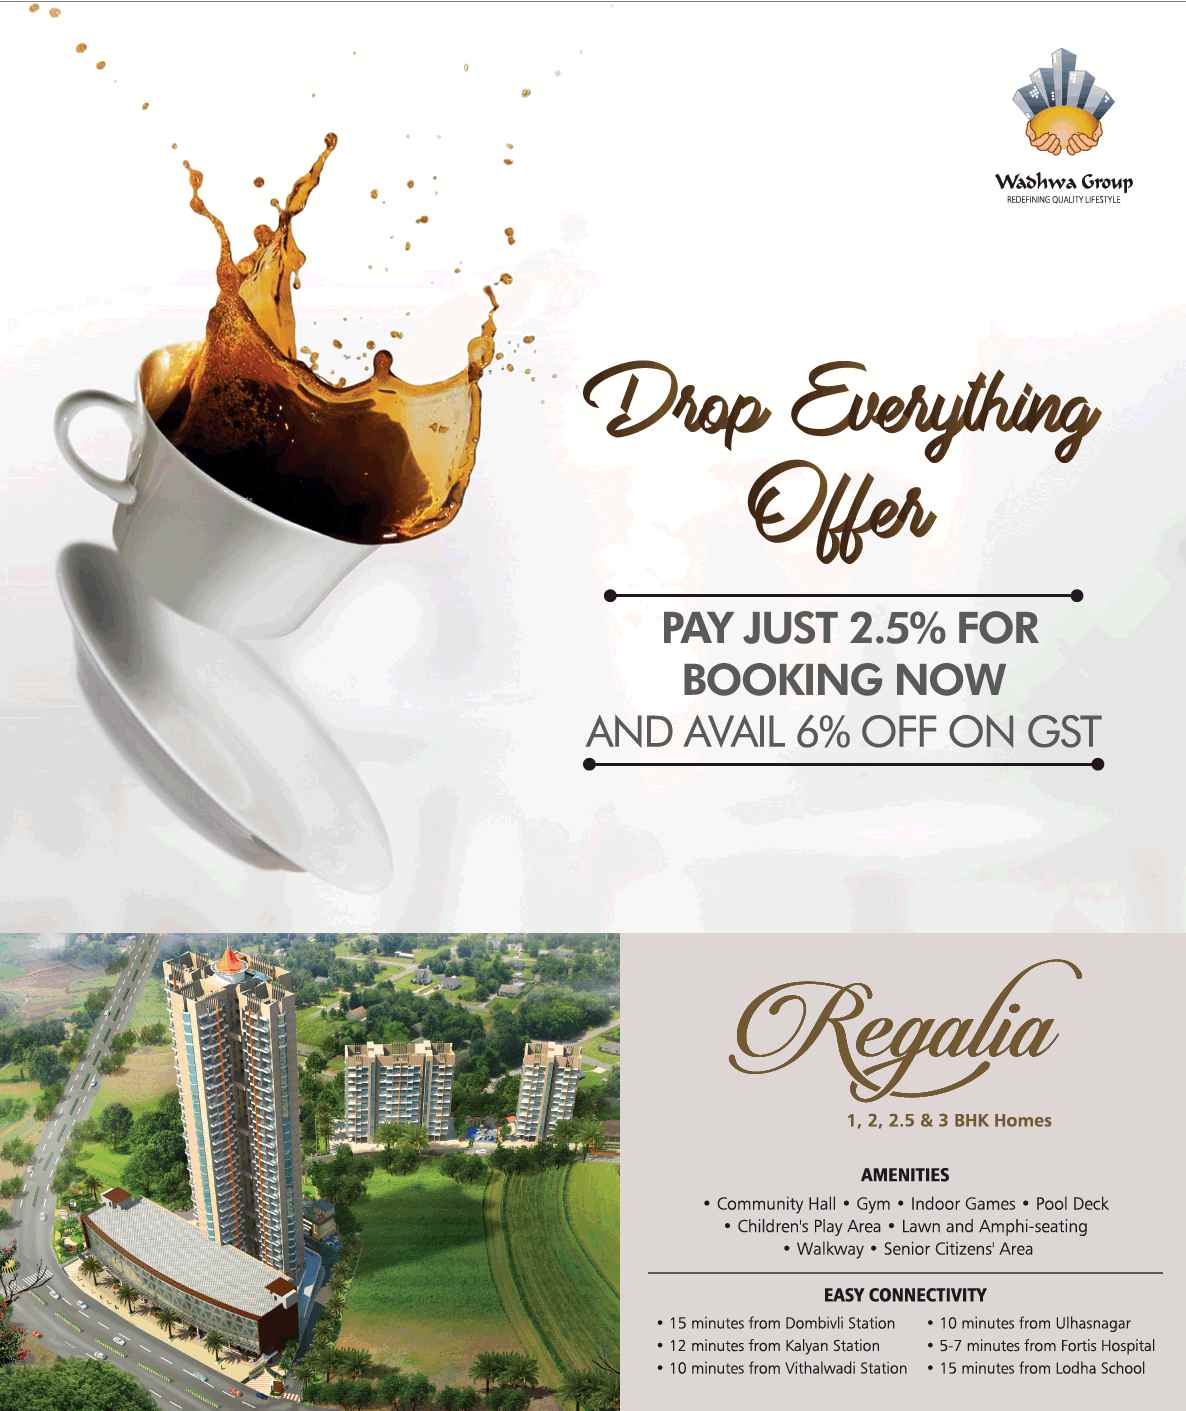 Pay just 2.5% for booking now and avail 6% off on GST at Wadhwa Regalia in Mumbai